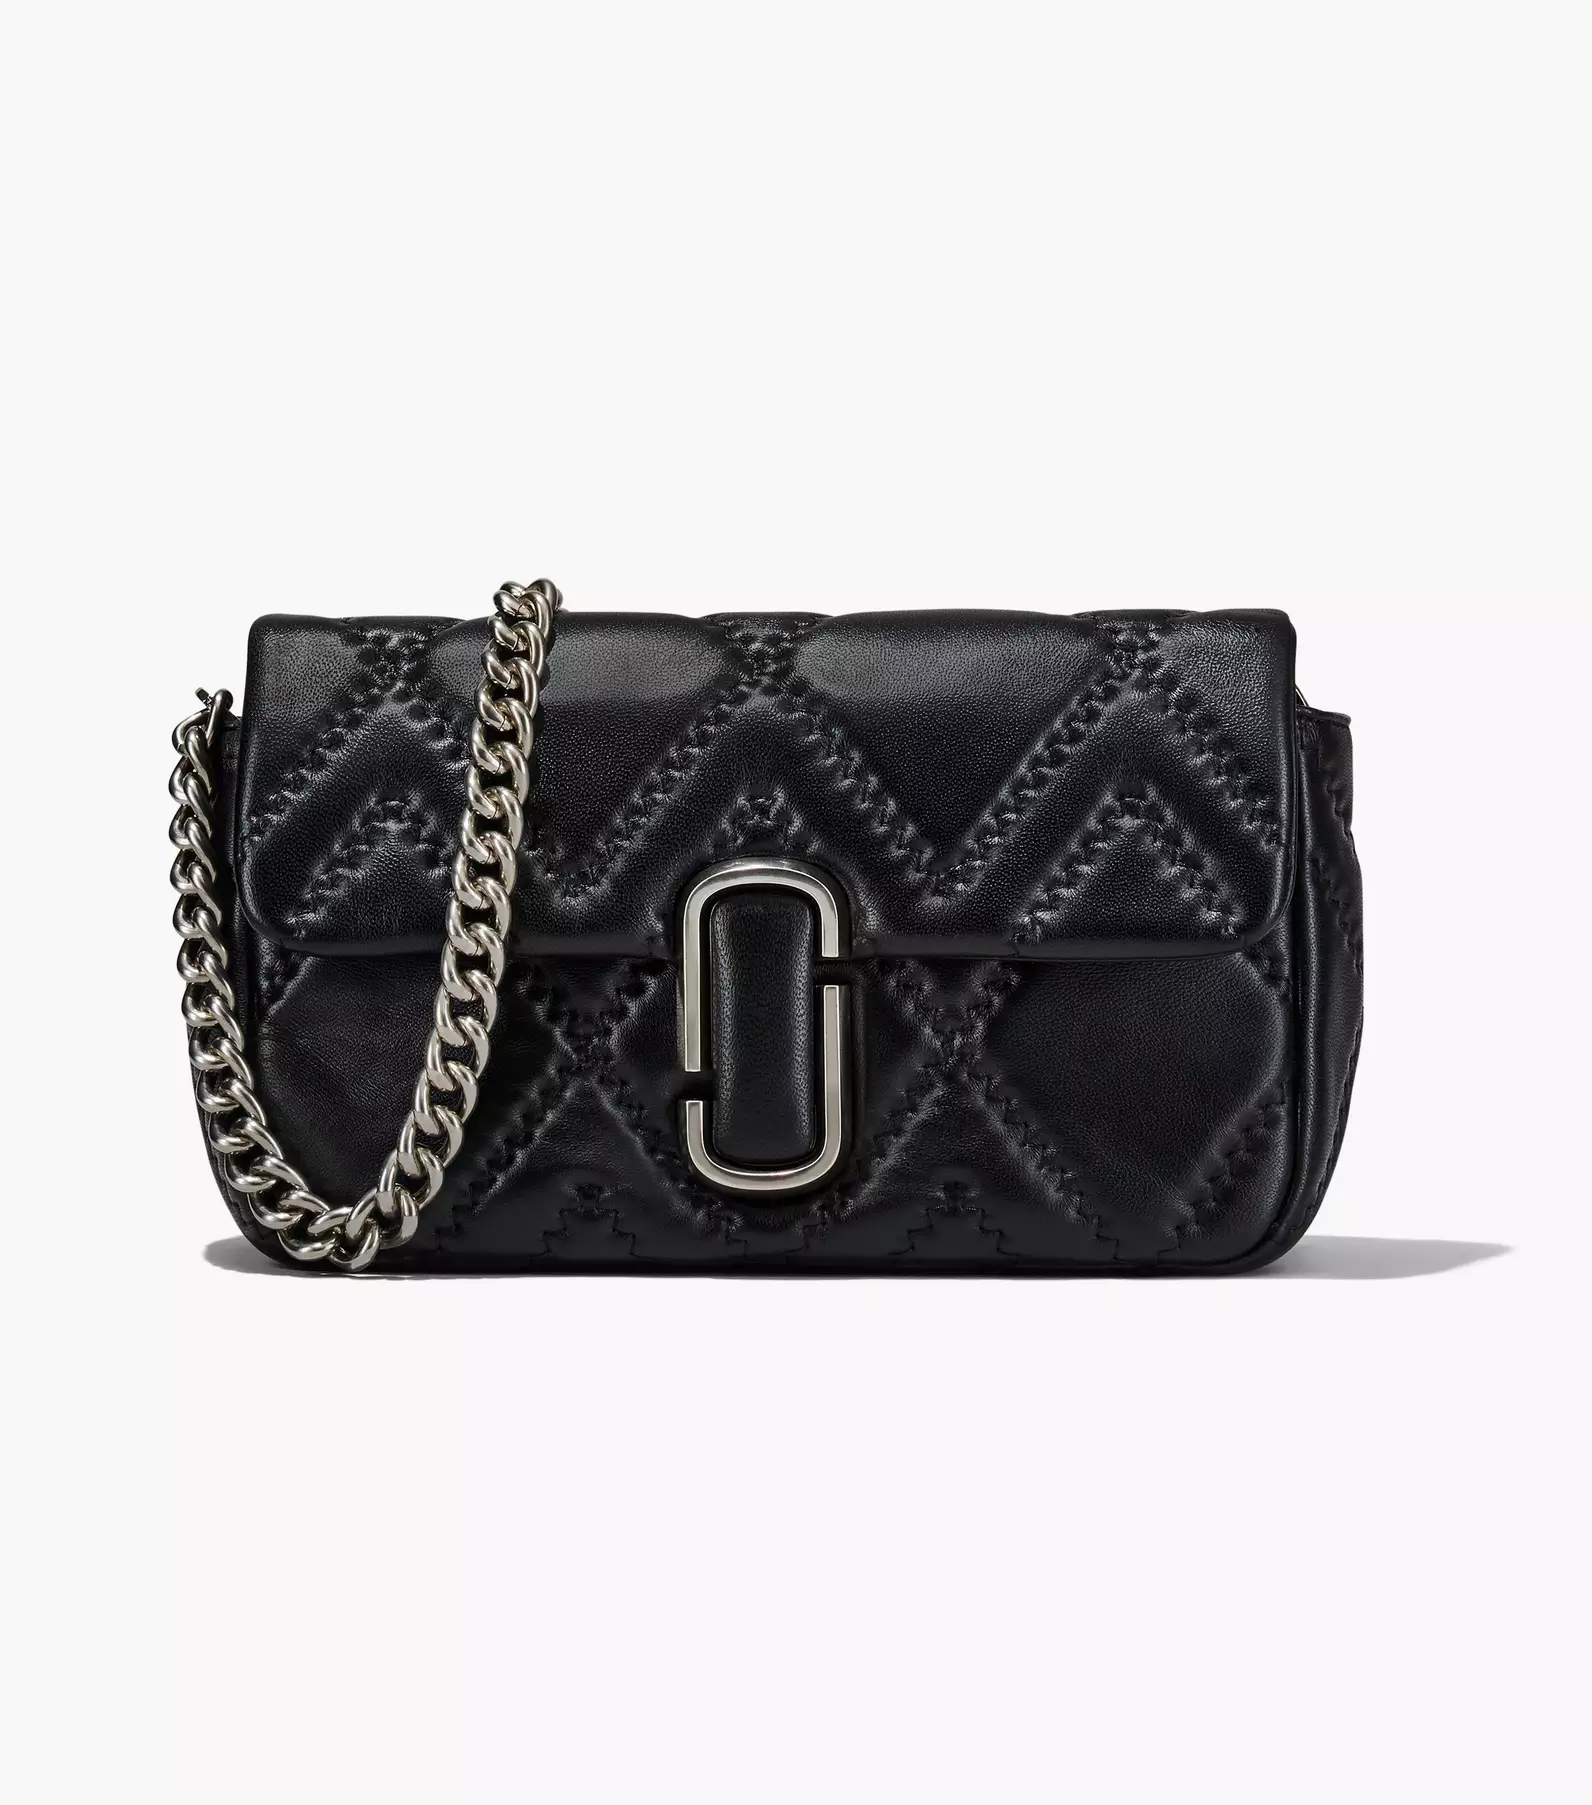 The Large Leather Tote Bag in Black - Marc Jacobs